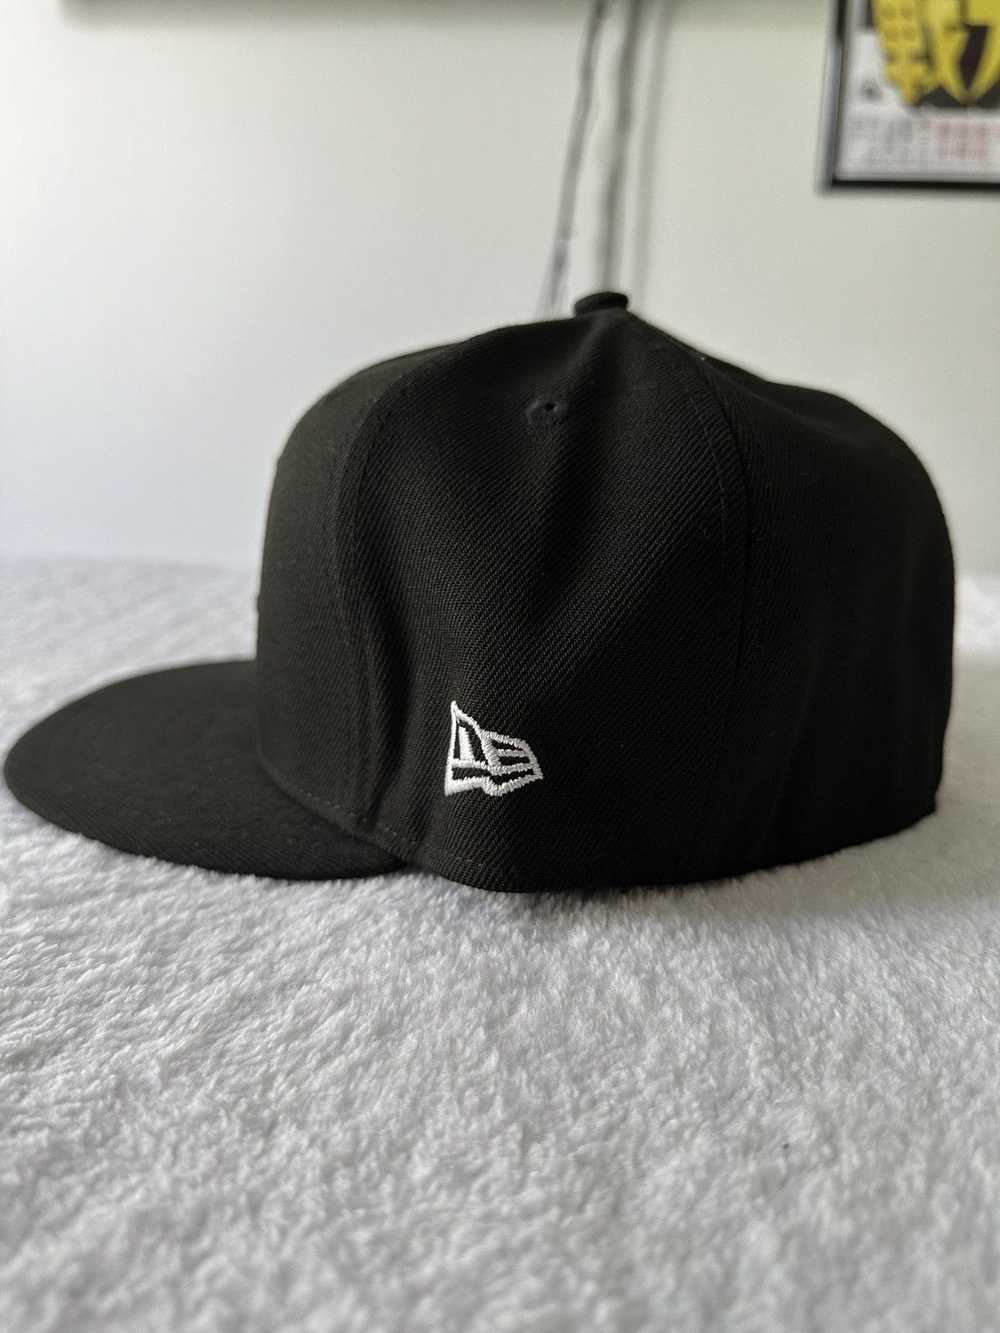 New Era Chicago White Sox Fitted Hat (7 1/4) - image 4